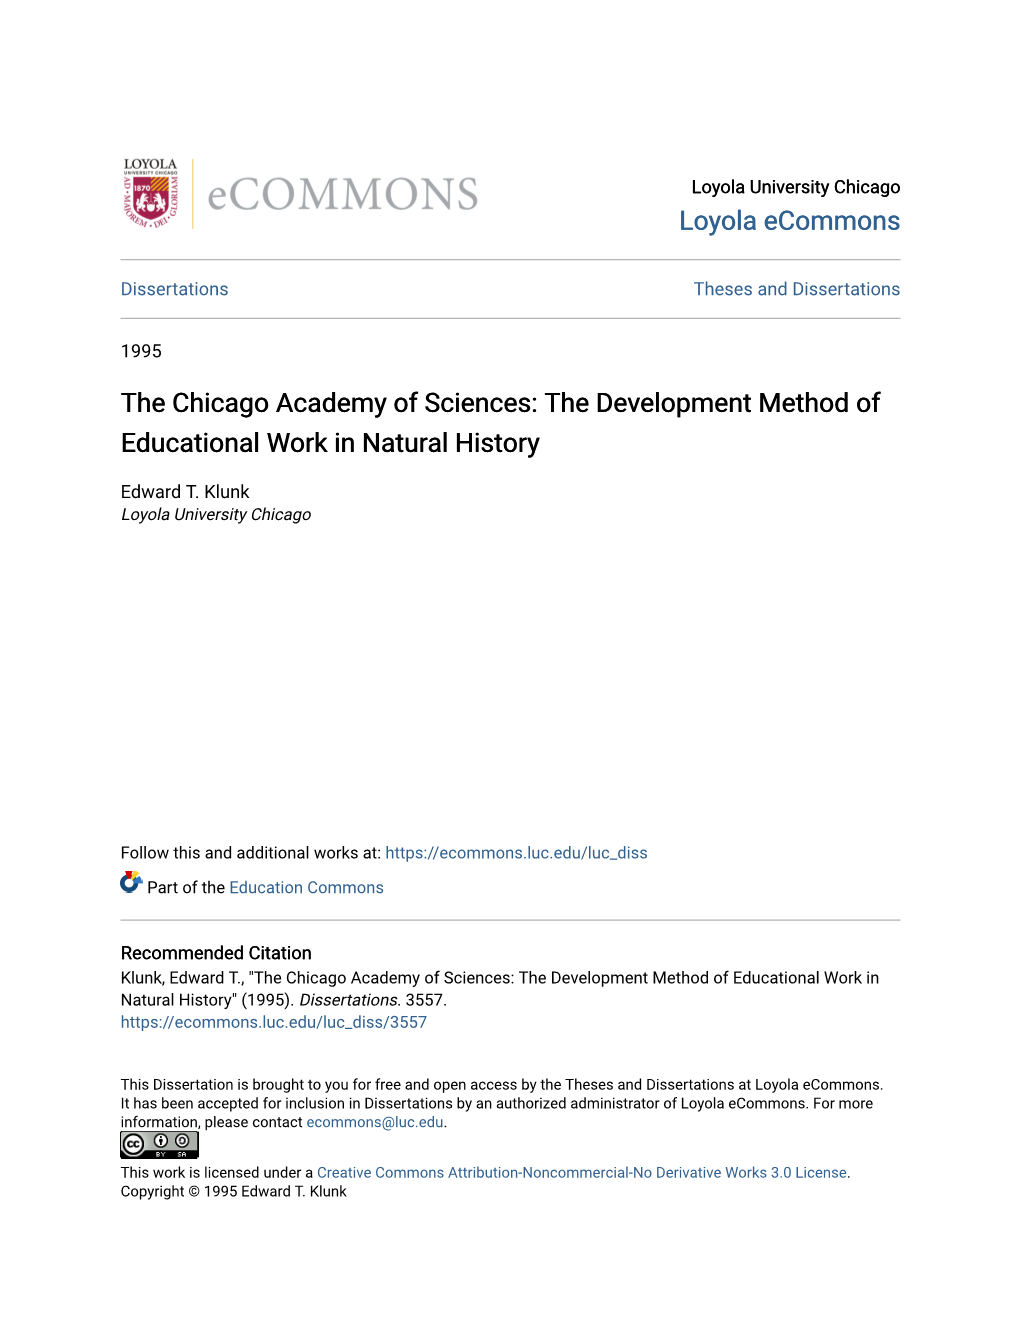 The Chicago Academy of Sciences: the Development Method of Educational Work in Natural History